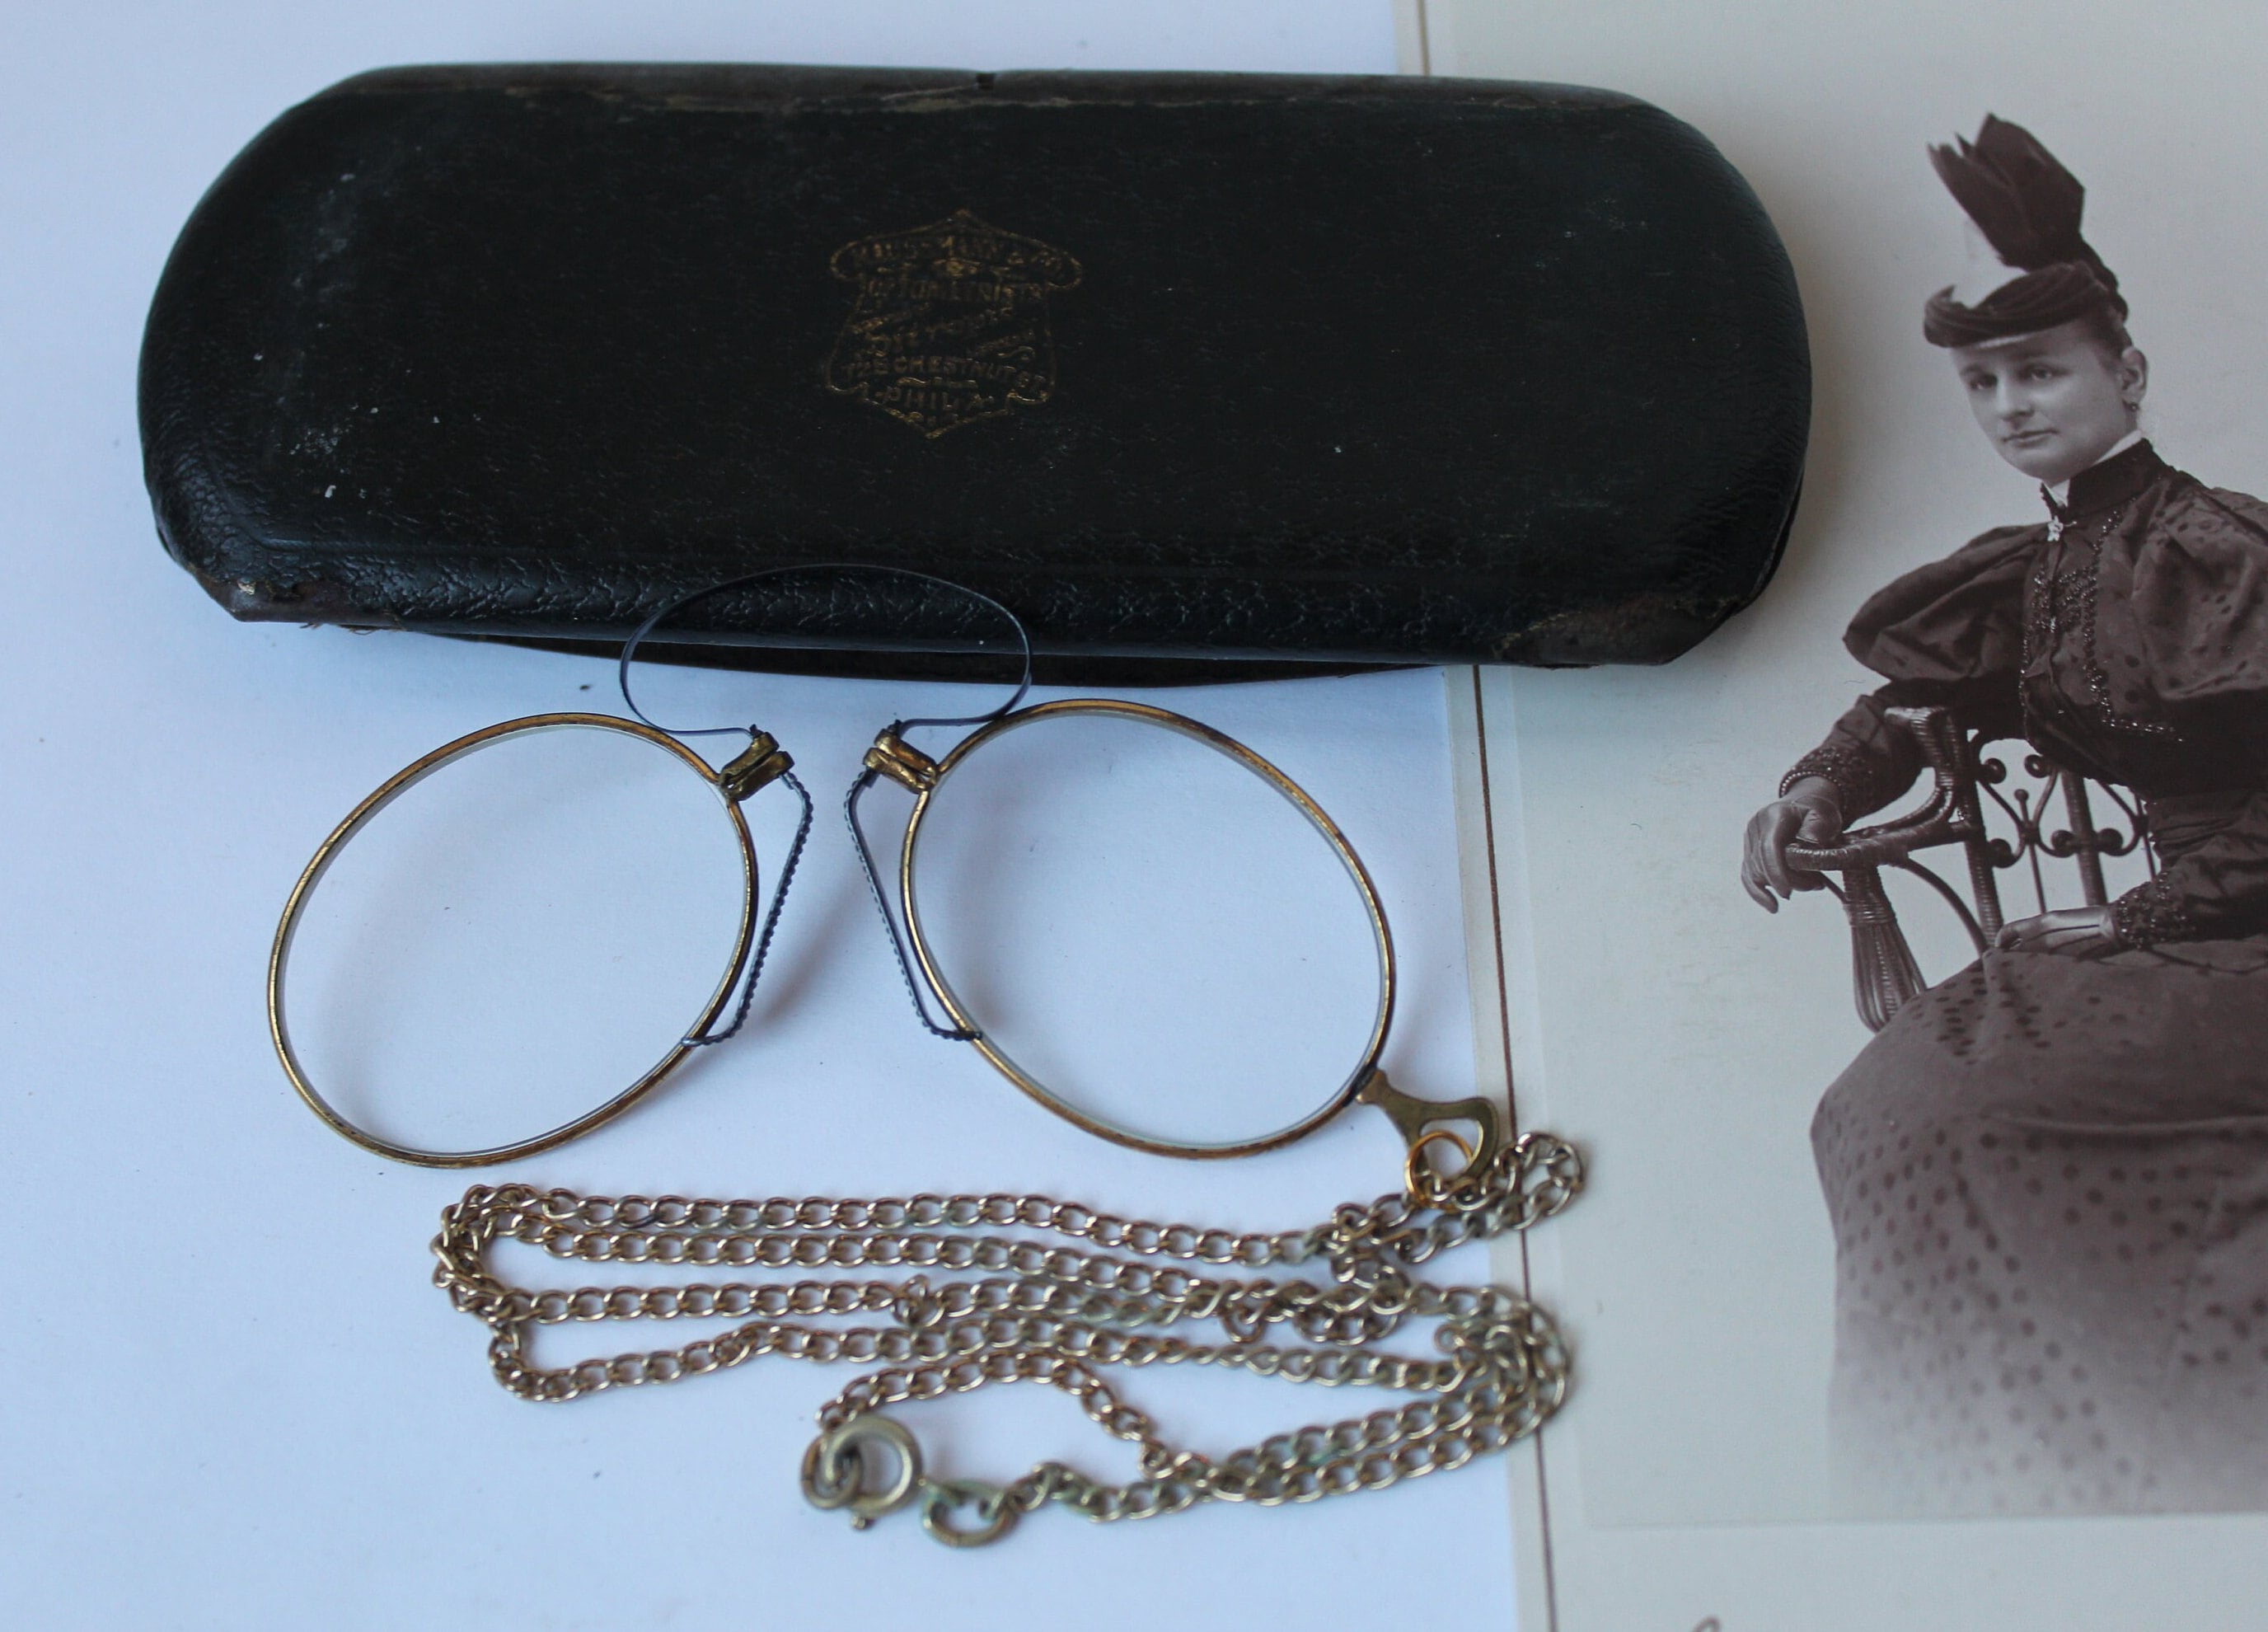 Pince Nez eyeglass spectacles w/ chain & hair pin Fits UL w/ retractor  pin 